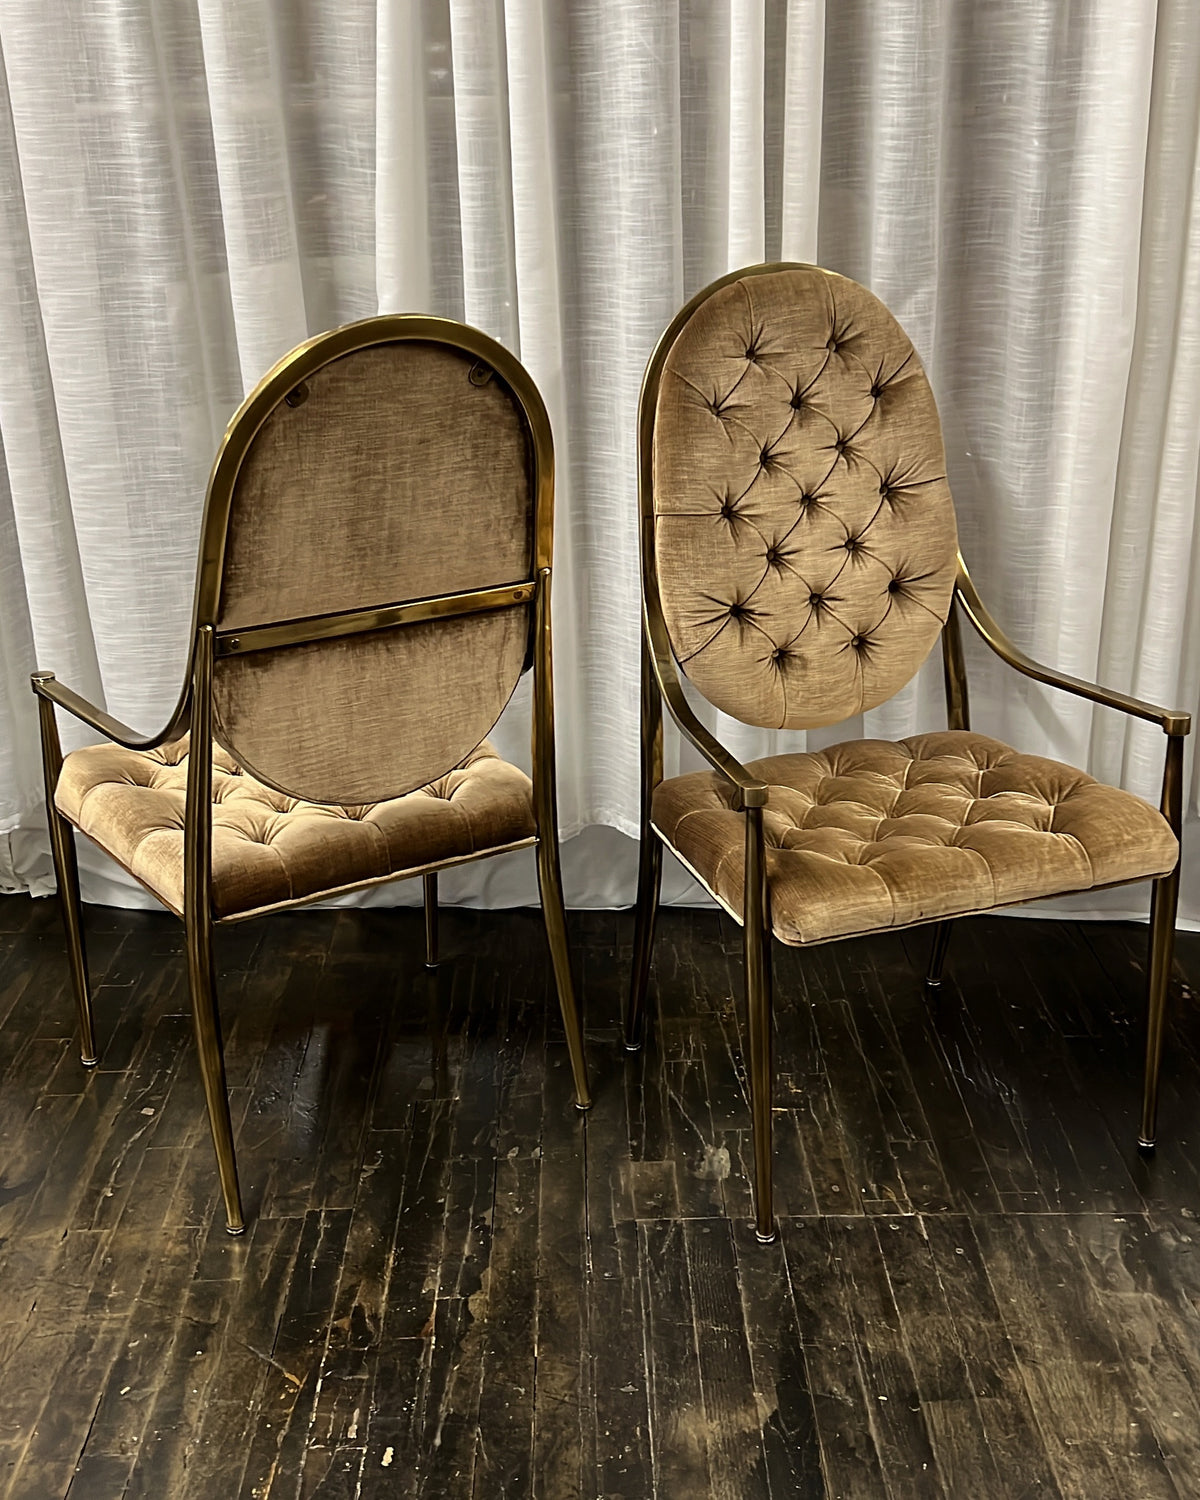 Set of 8 Mastercraft Brass Dining Chairs with Arms.  Bronze velvet upholstery.  Original excellent condition.  Hollywood regency.  Midcentury Modern Dining.  Bernhard Rohne.